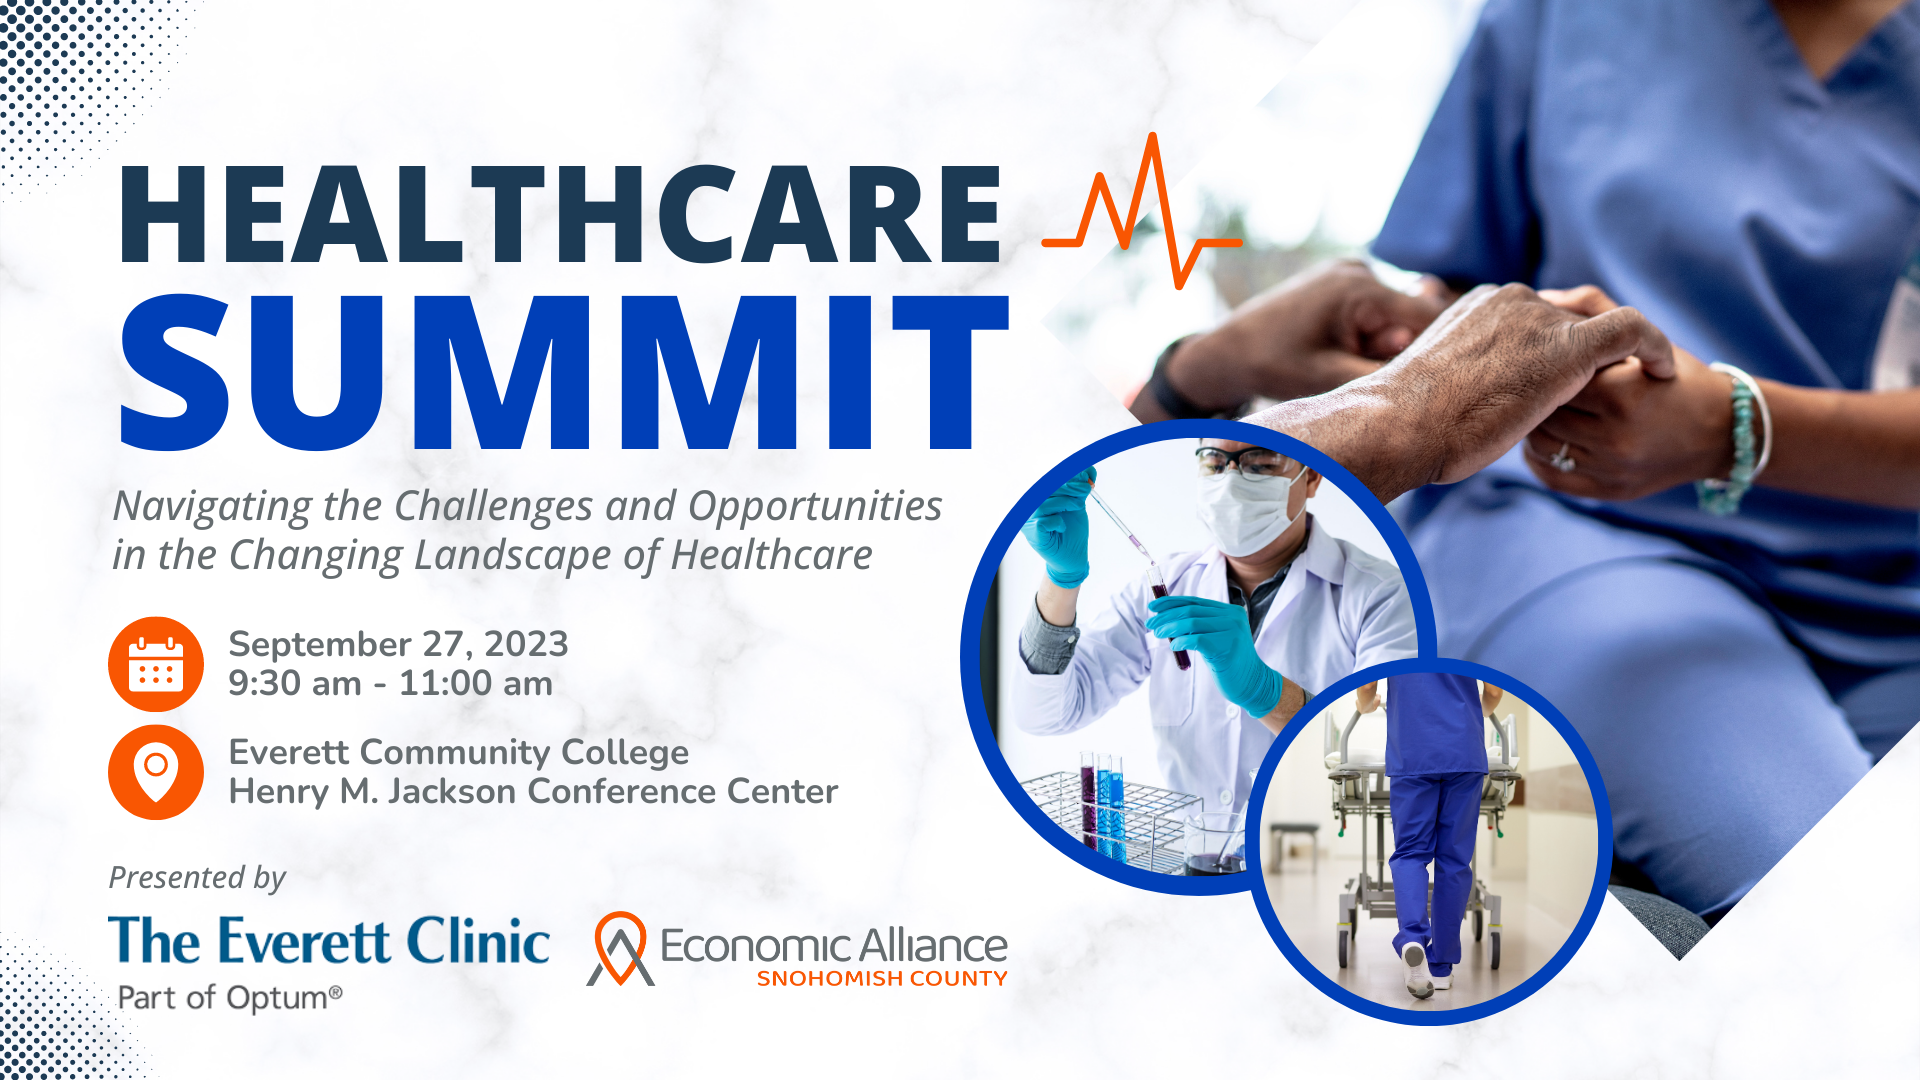 Healthcare Summit - Navigating the Challenges and Opportunities in the Changing Landscape of Healthcare Photo